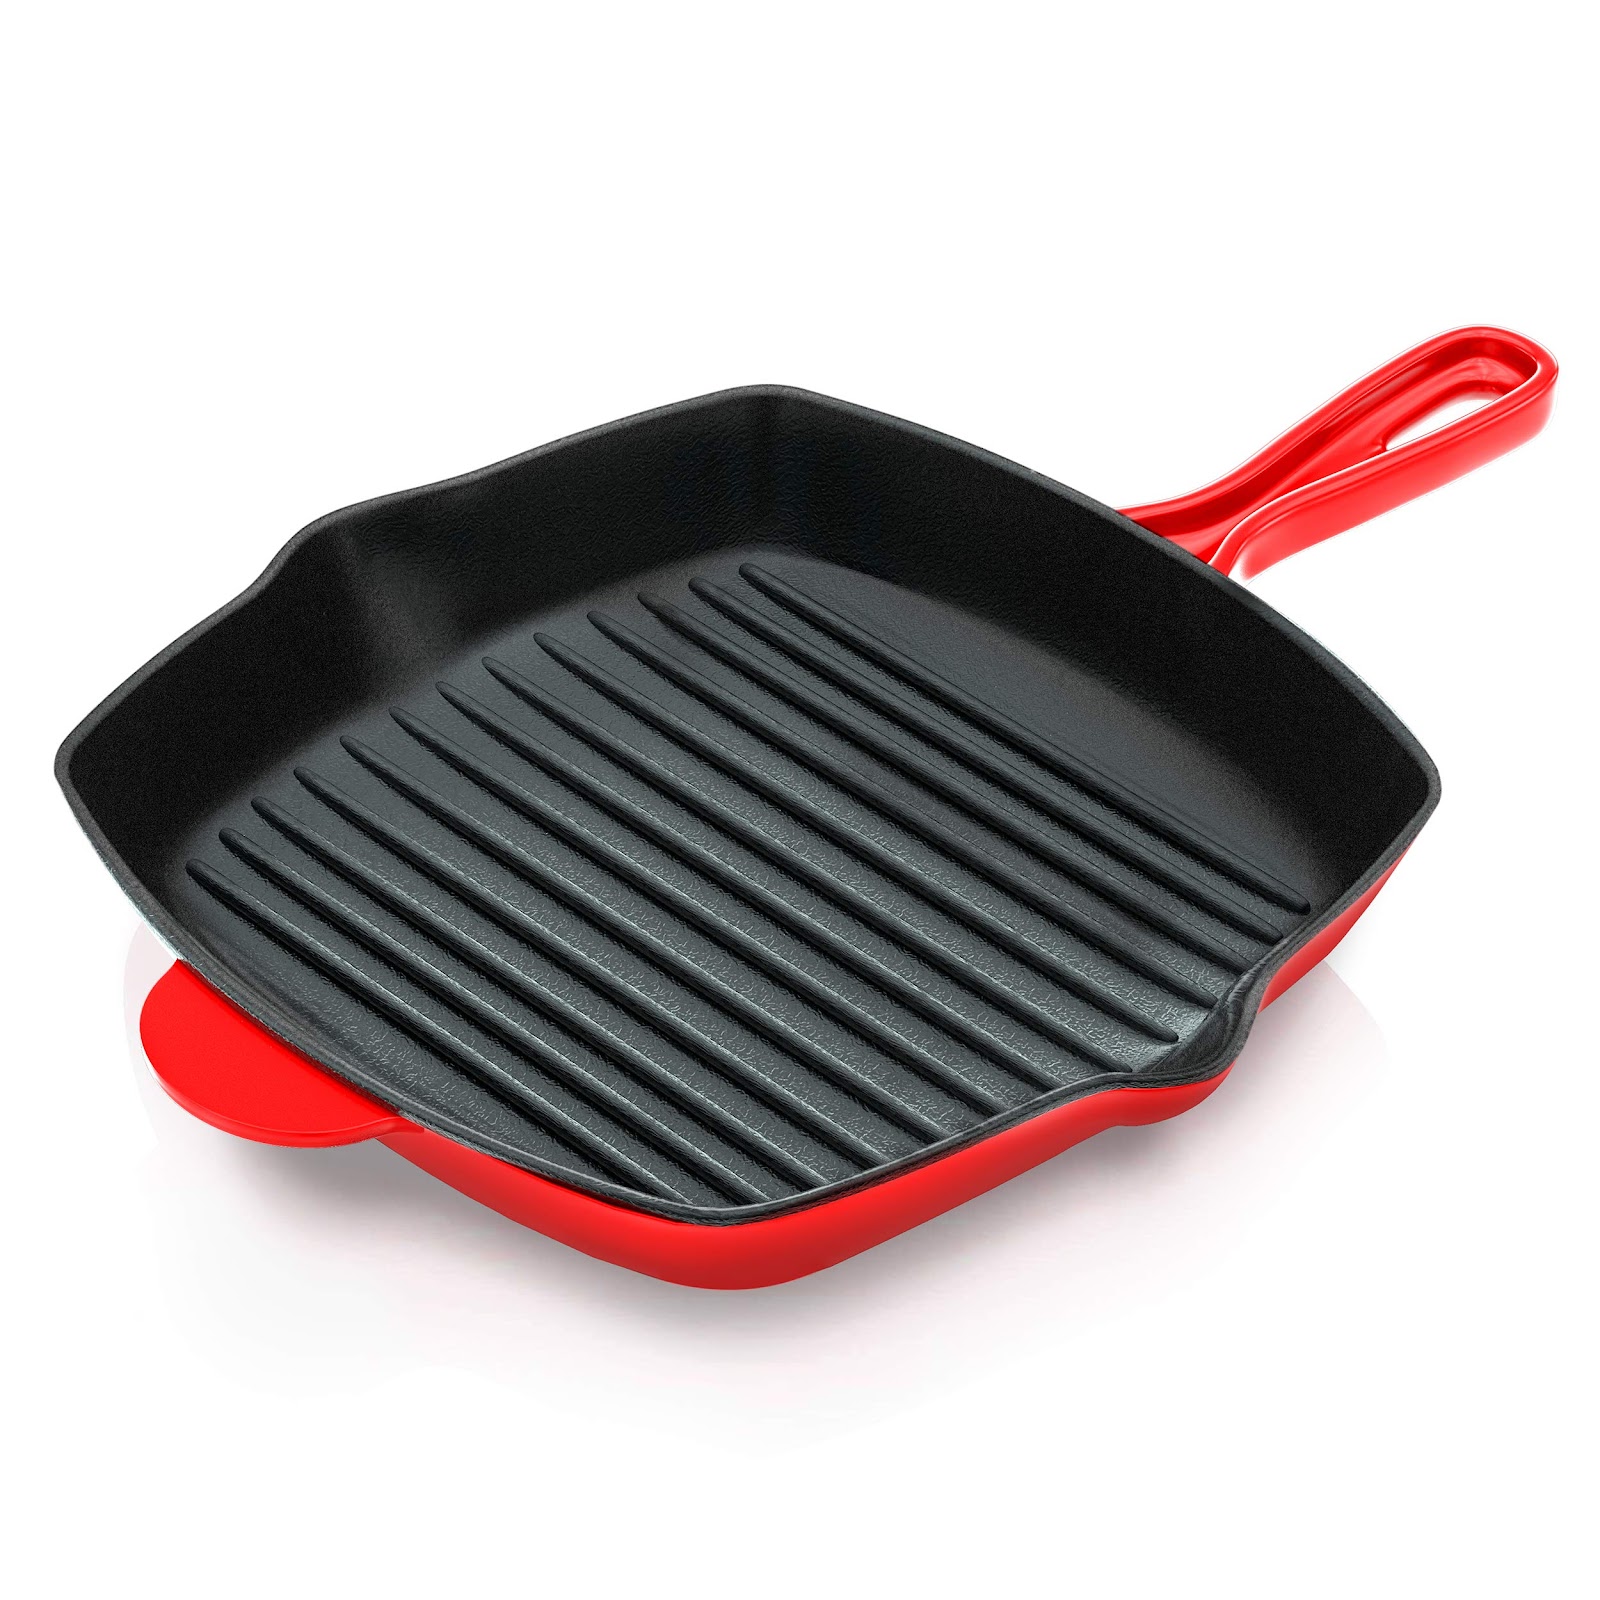 NutriChef Nonstick Cast Iron Grill Pan